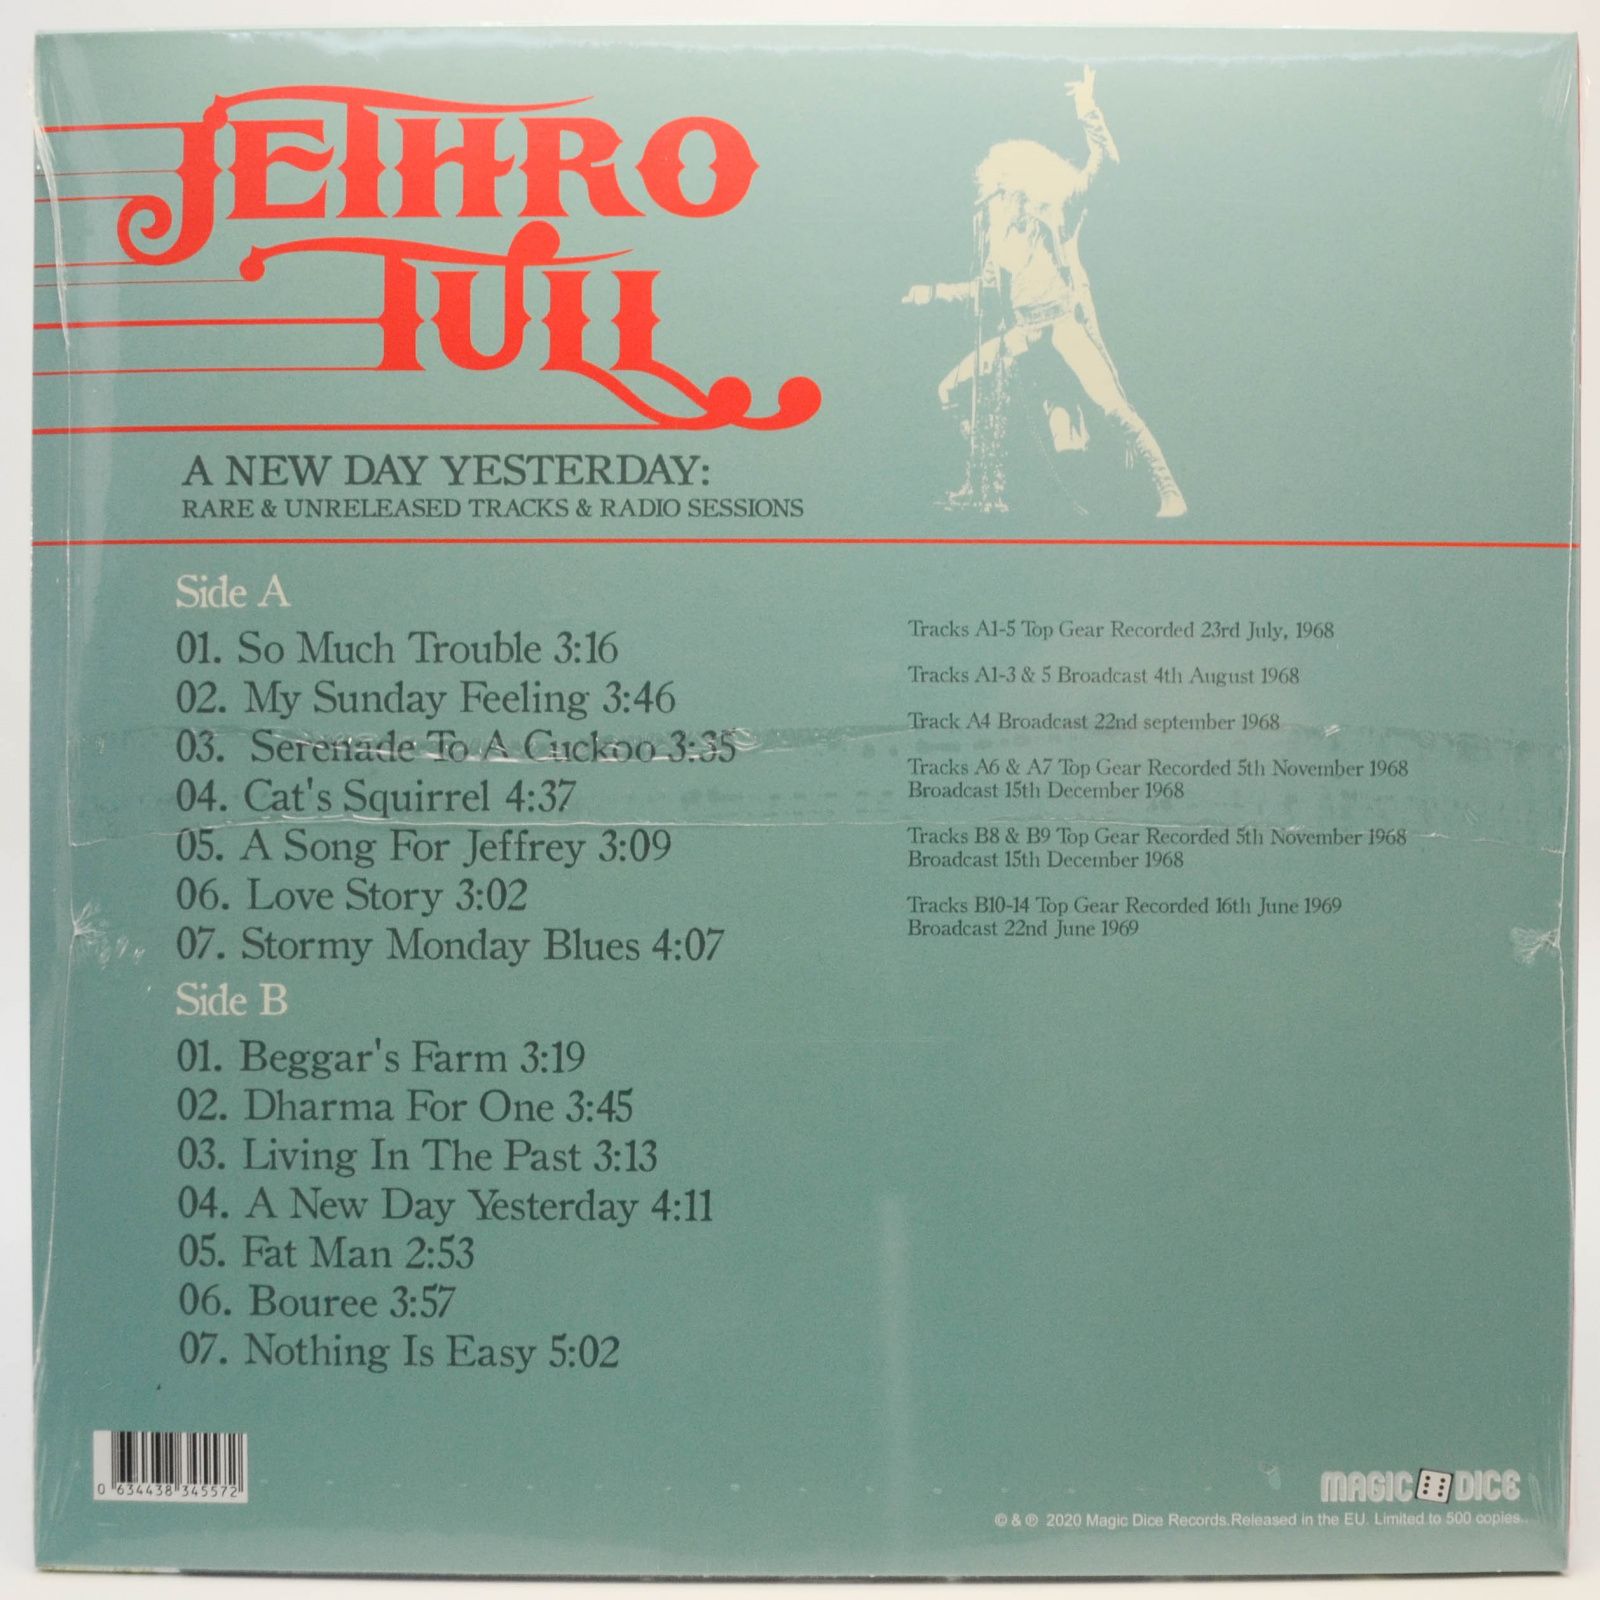 Jethro Tull — A New Day Yesterday: Rare & Unreleased Tracks & Radio Sessions, 2020